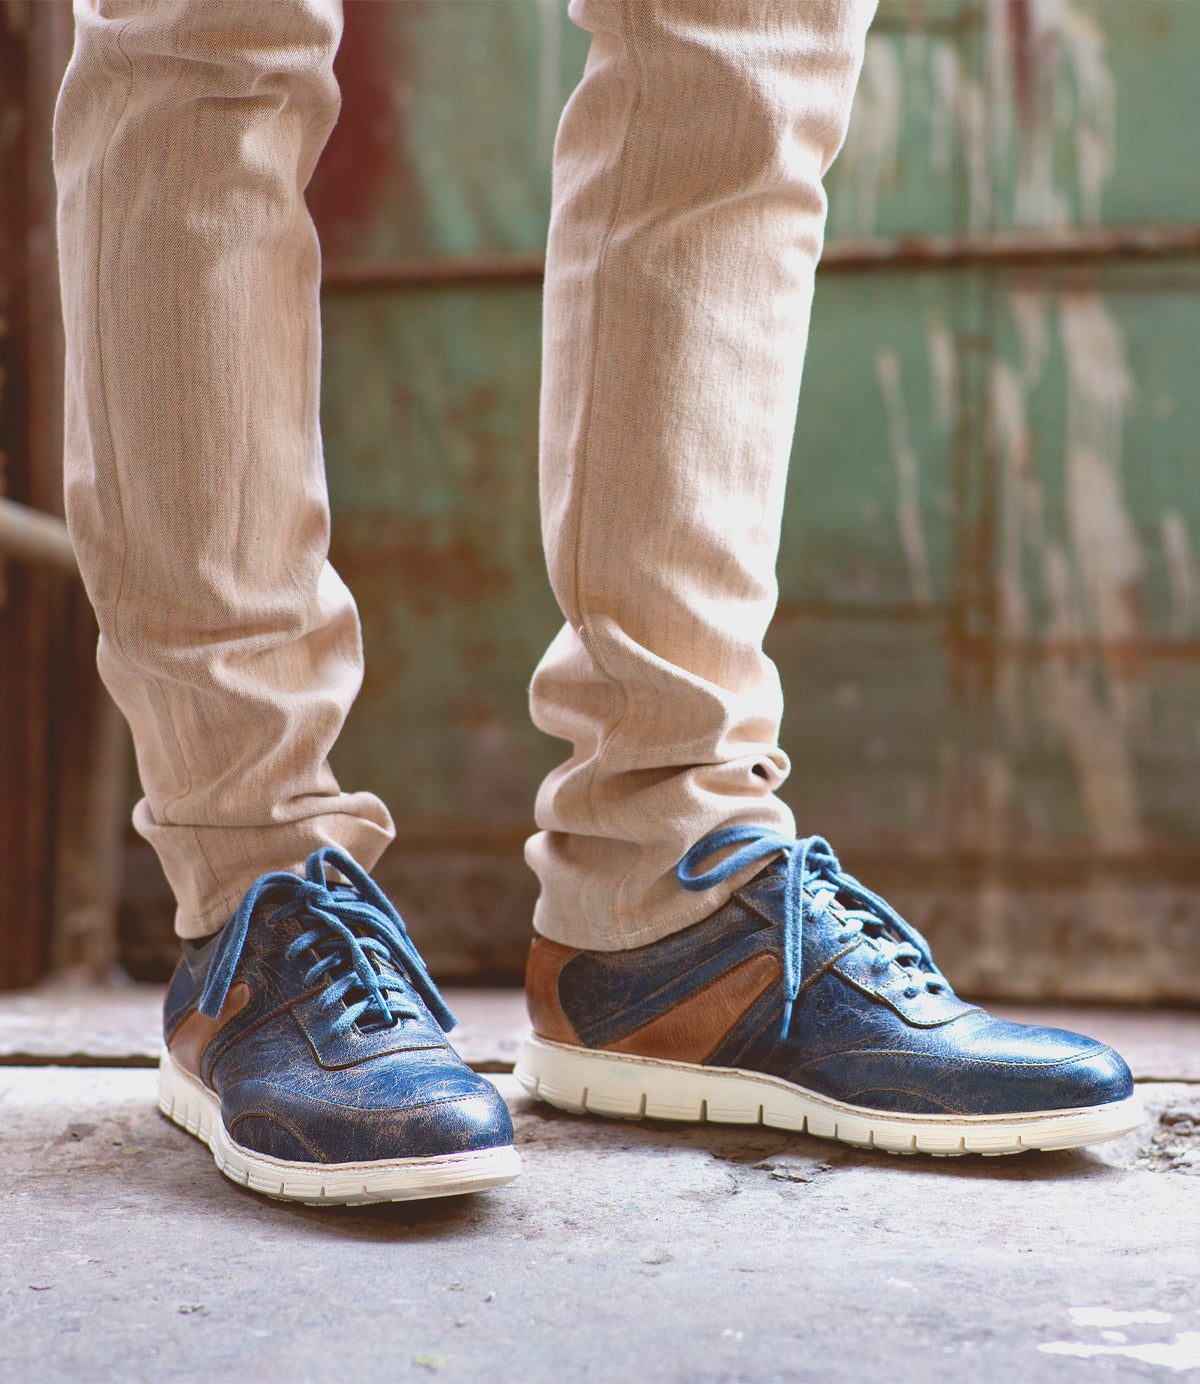 A person standing in an urban setting, wearing distressed Bed Stu lace-up sneakers and beige pants, with a rusted green door in the background.